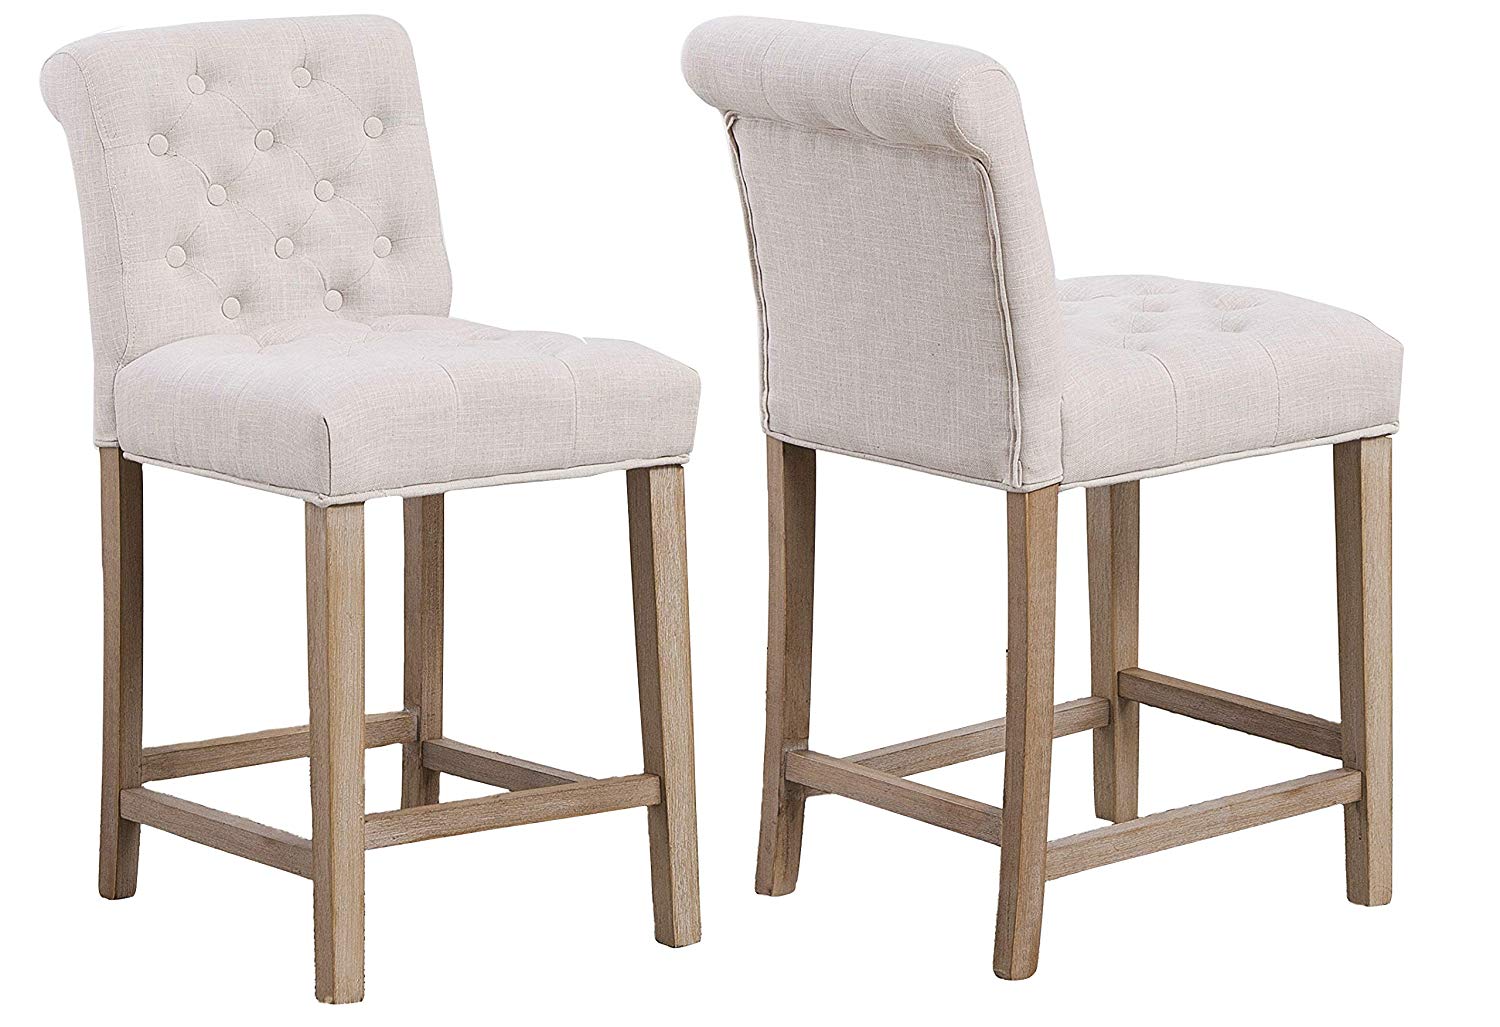 SET OF TWO High Back Tufted Parsons Upholstered Padded Dining Room